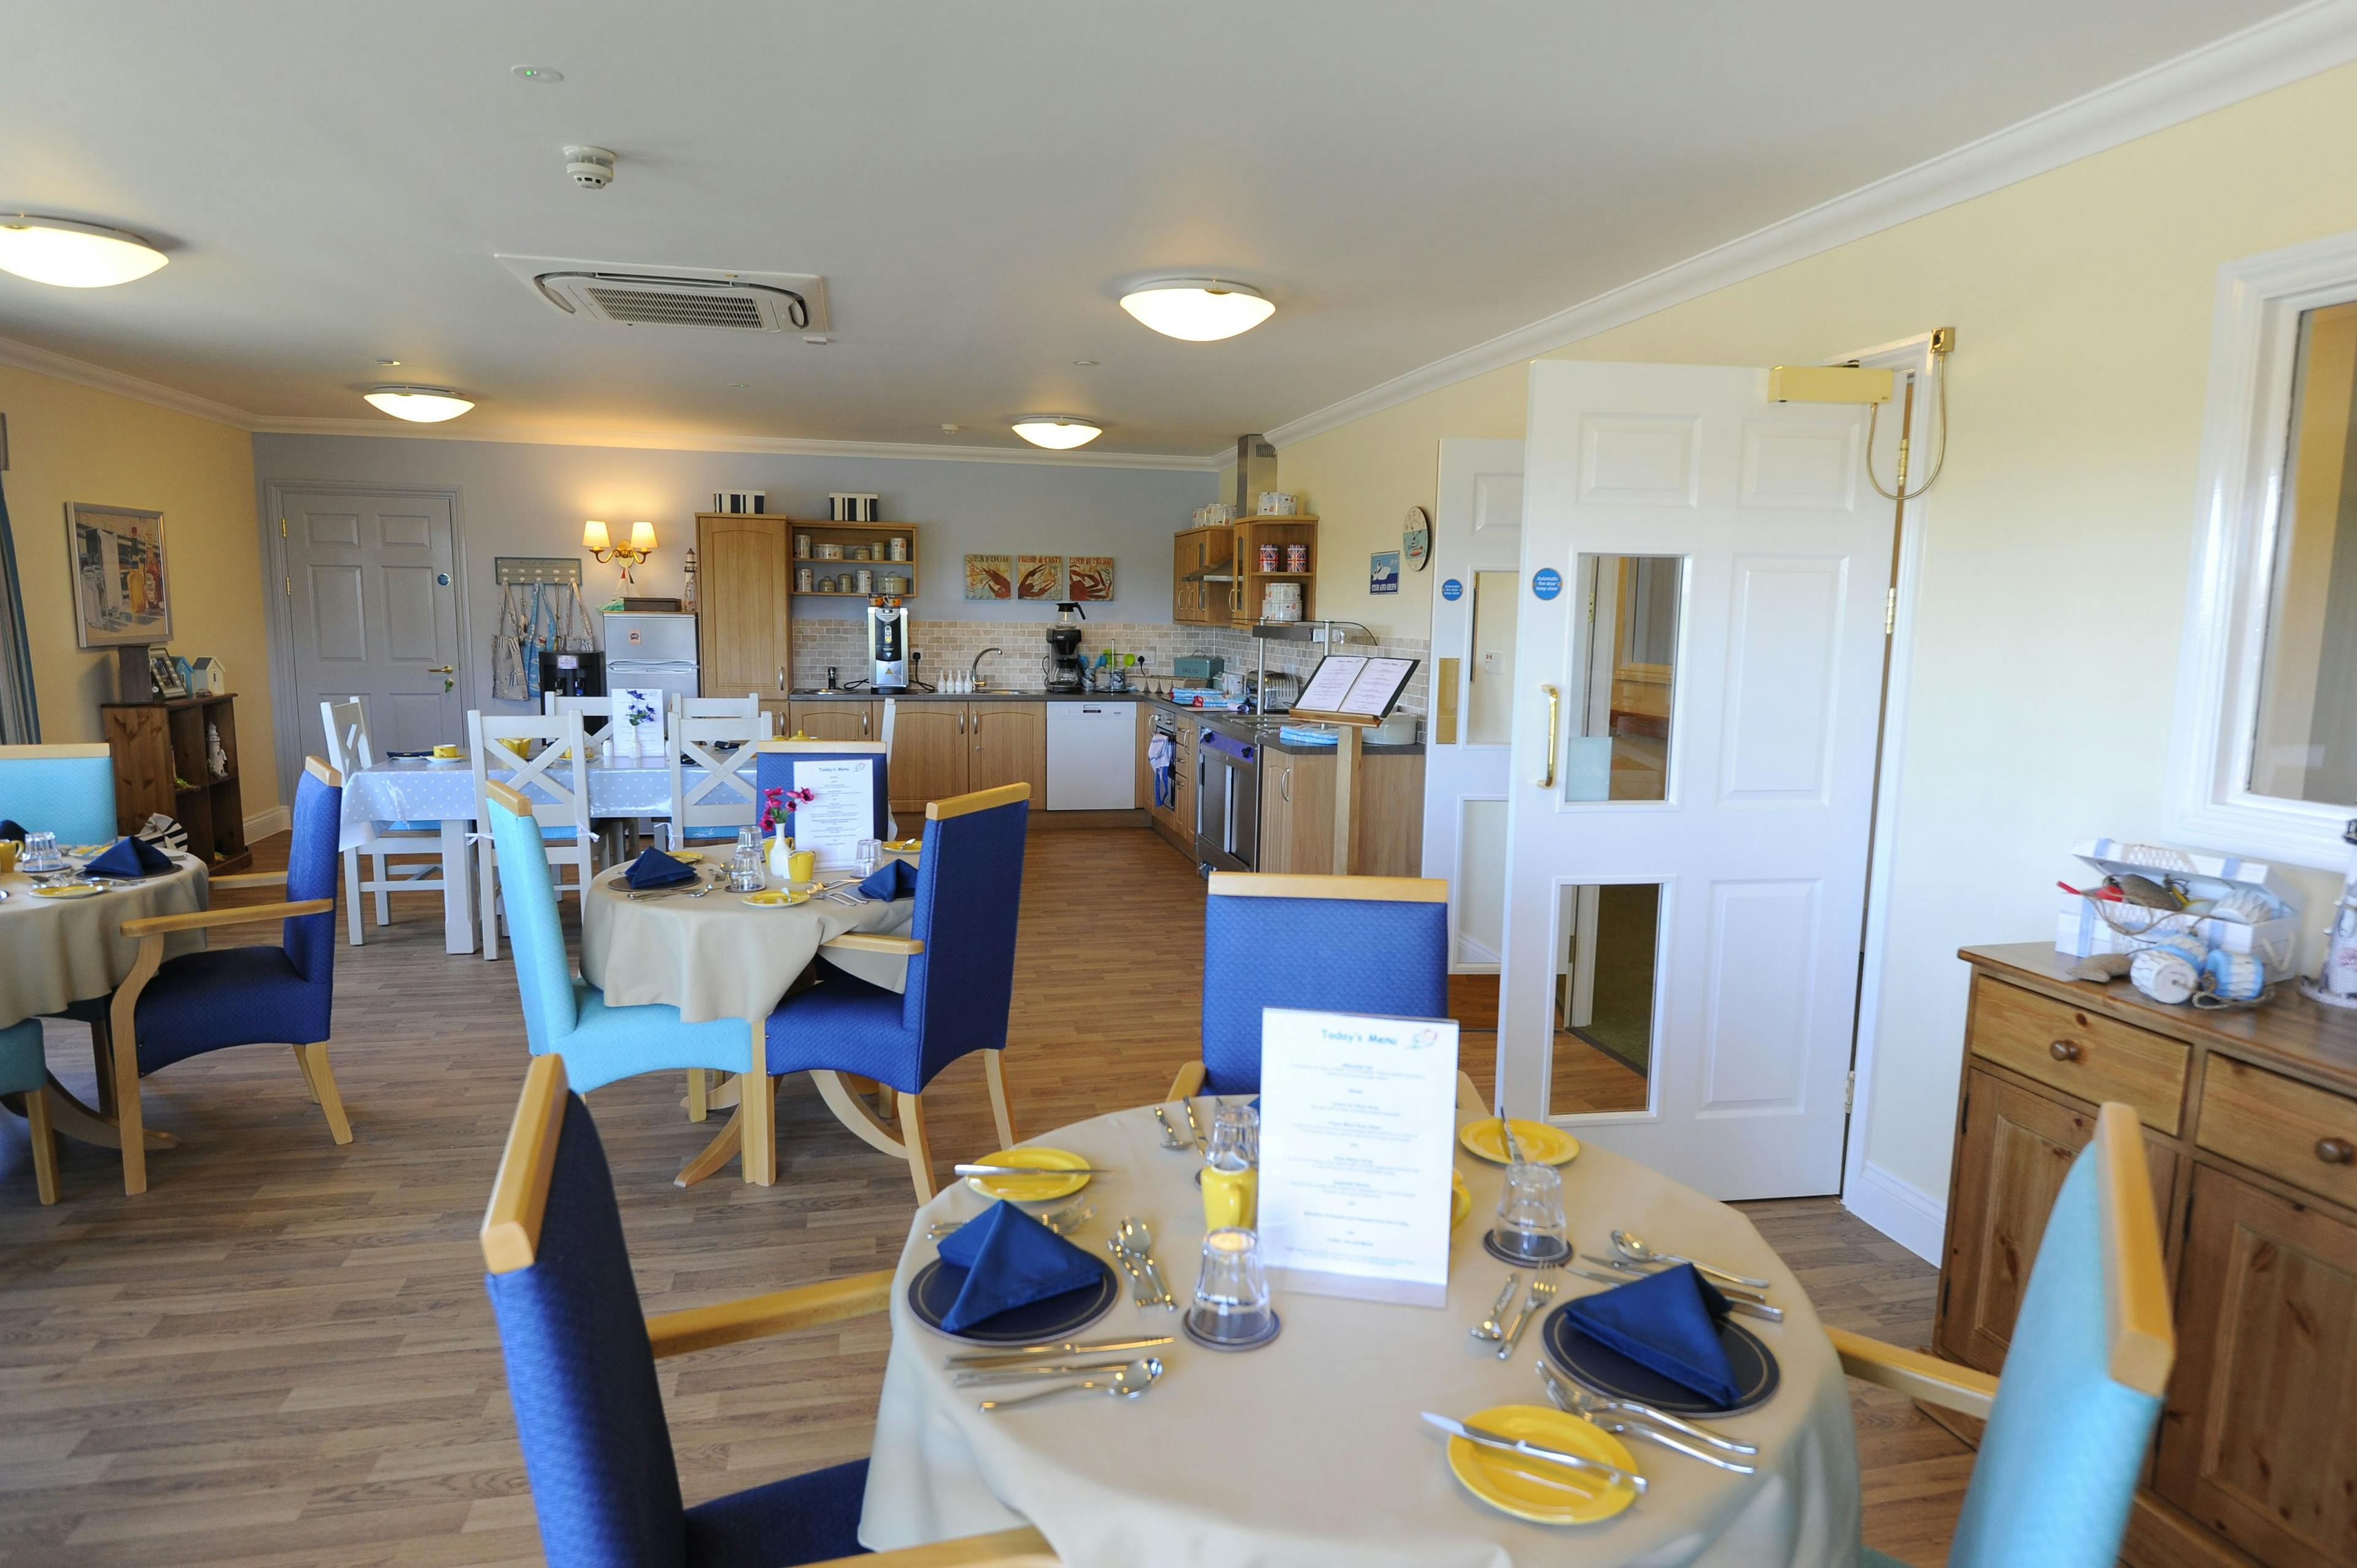 Dining Room at Ritson Lodge Care Home in Gorleston-on-Sea, Great Yarmouth